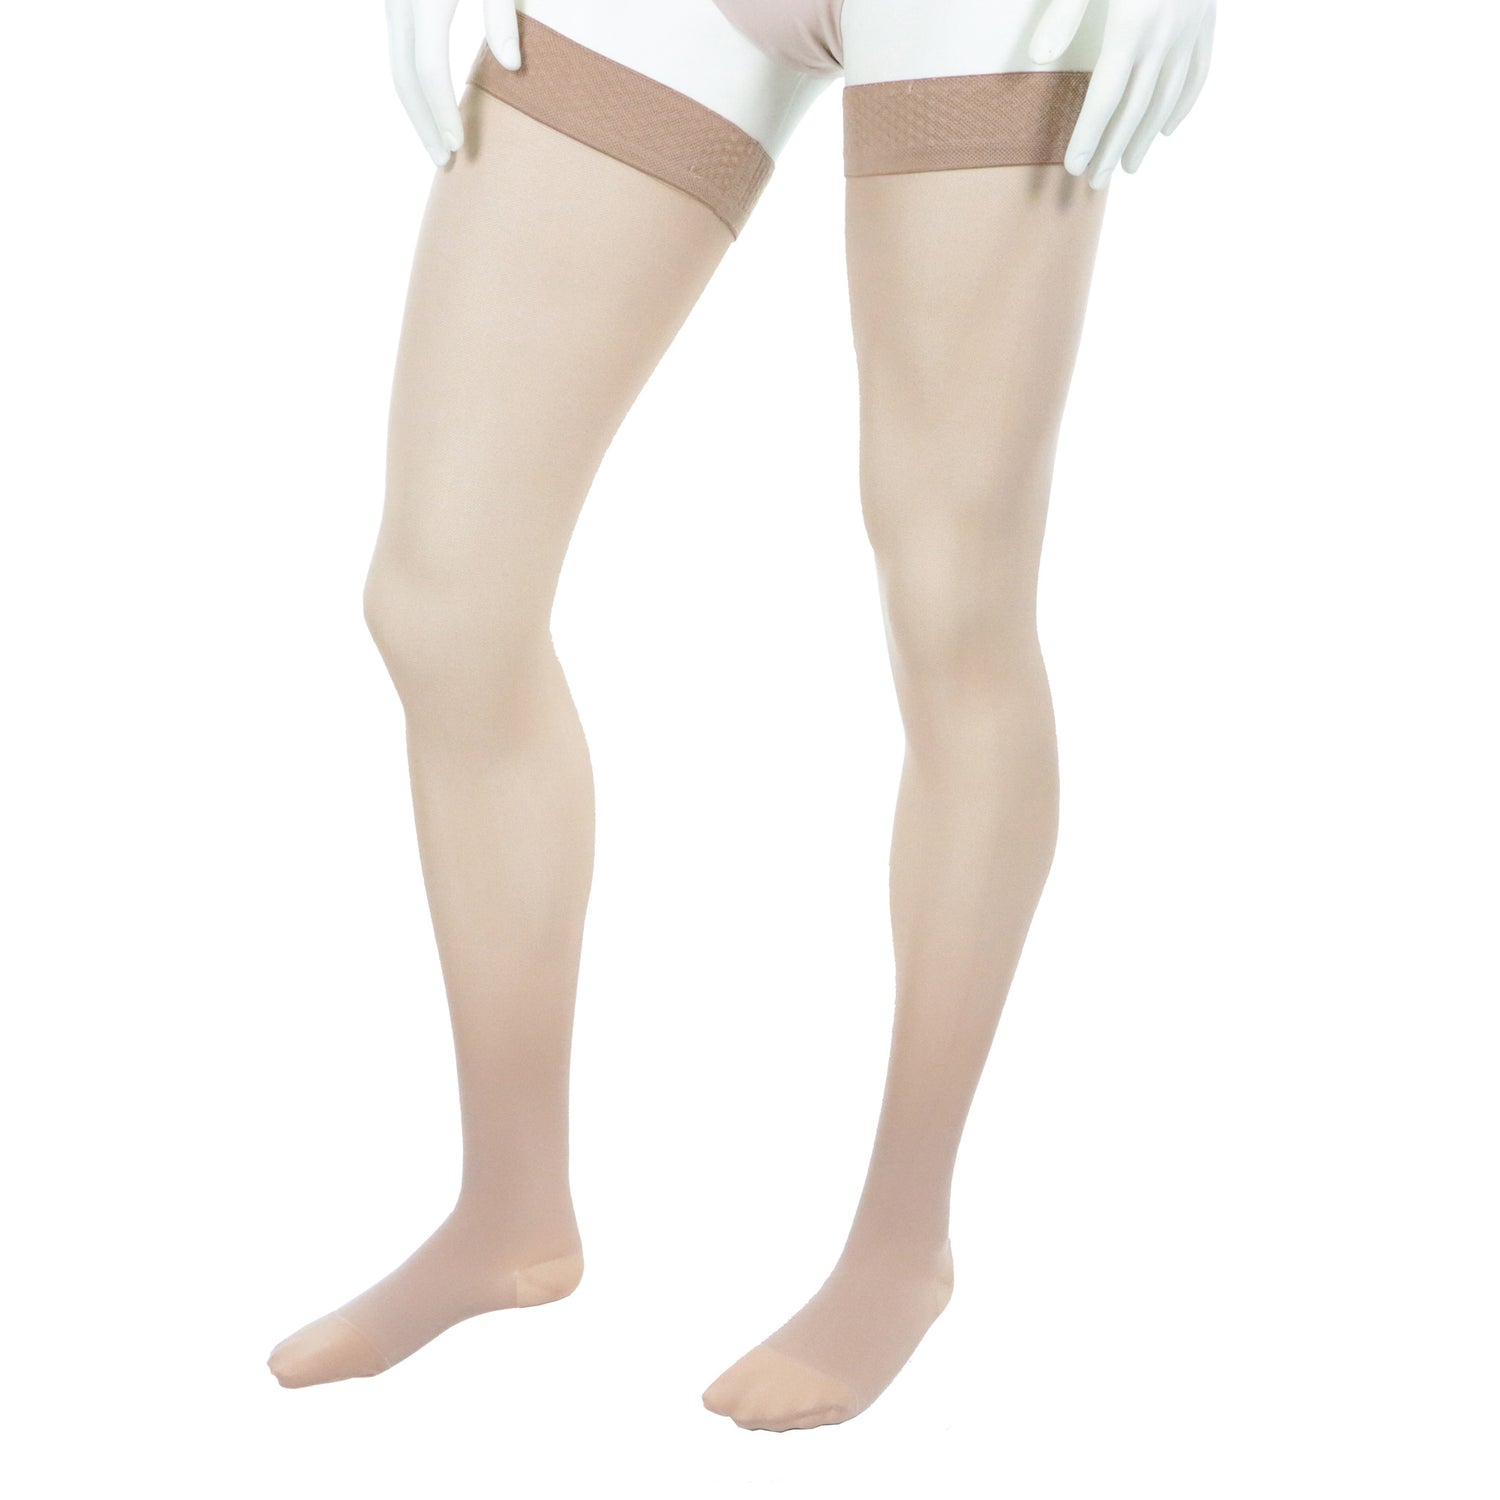 Doctor Brace thigh high 30-40 mmHg compression stockings nude color left view